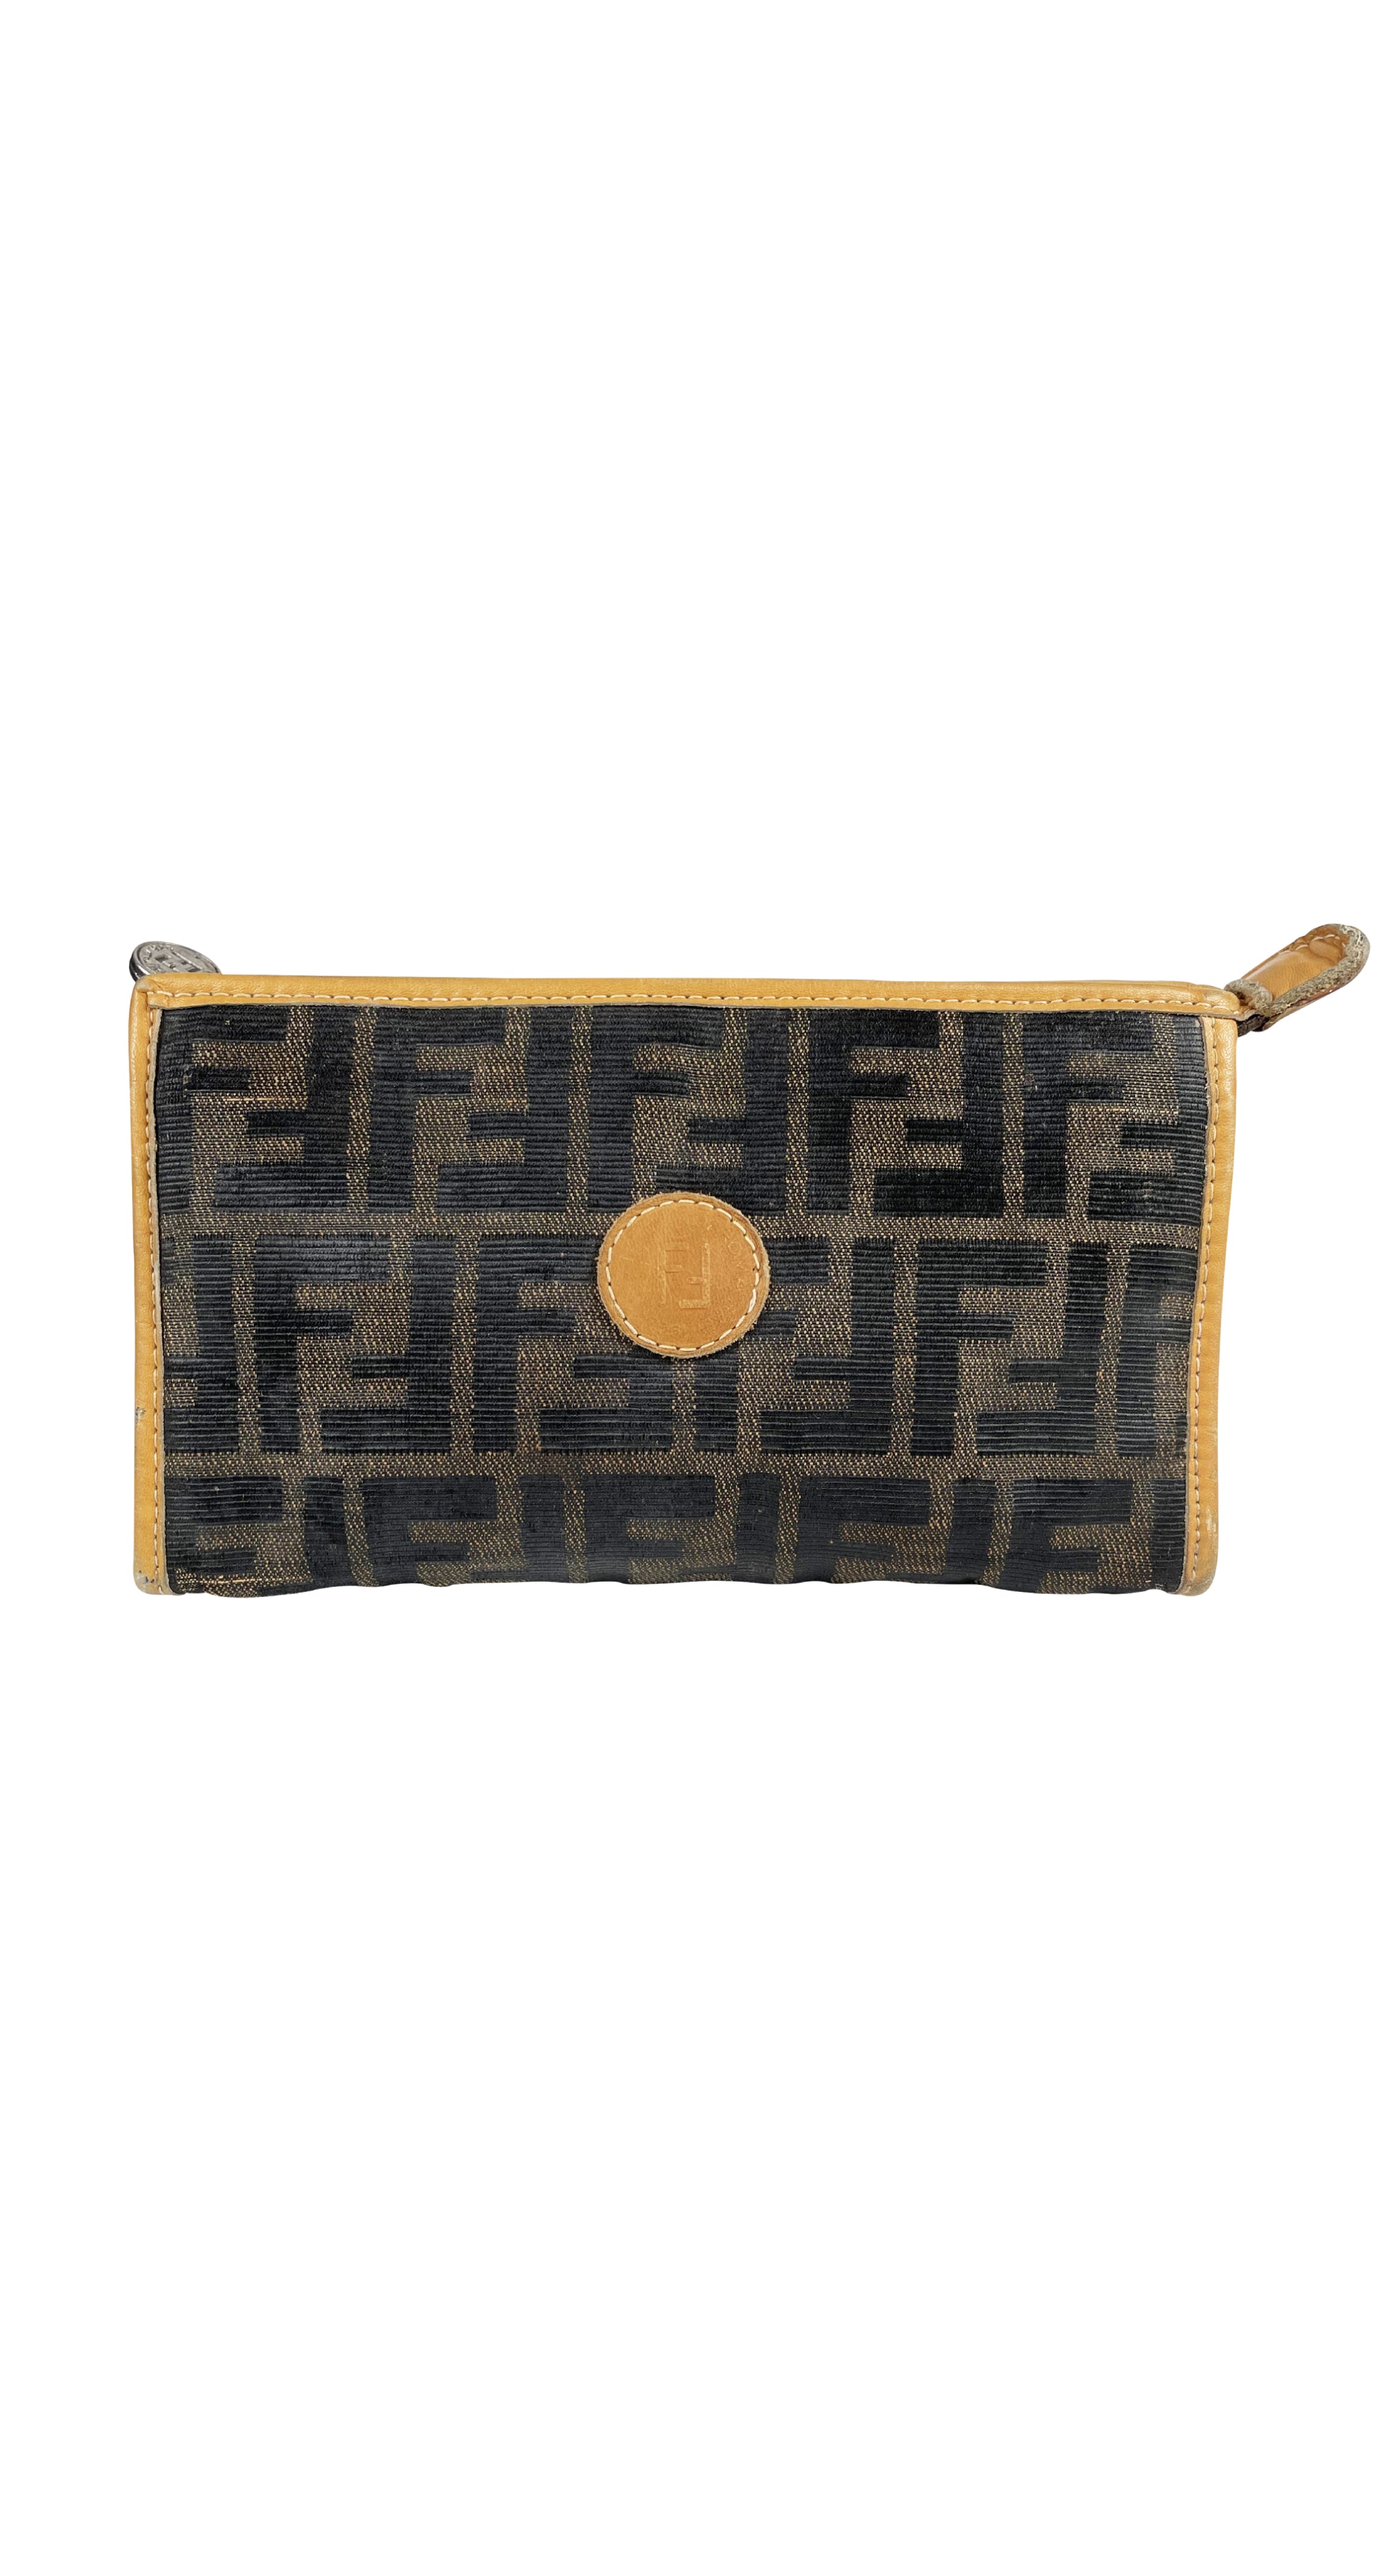 1970s Zucca Canvas Leather Trim Cosmetic Pouch